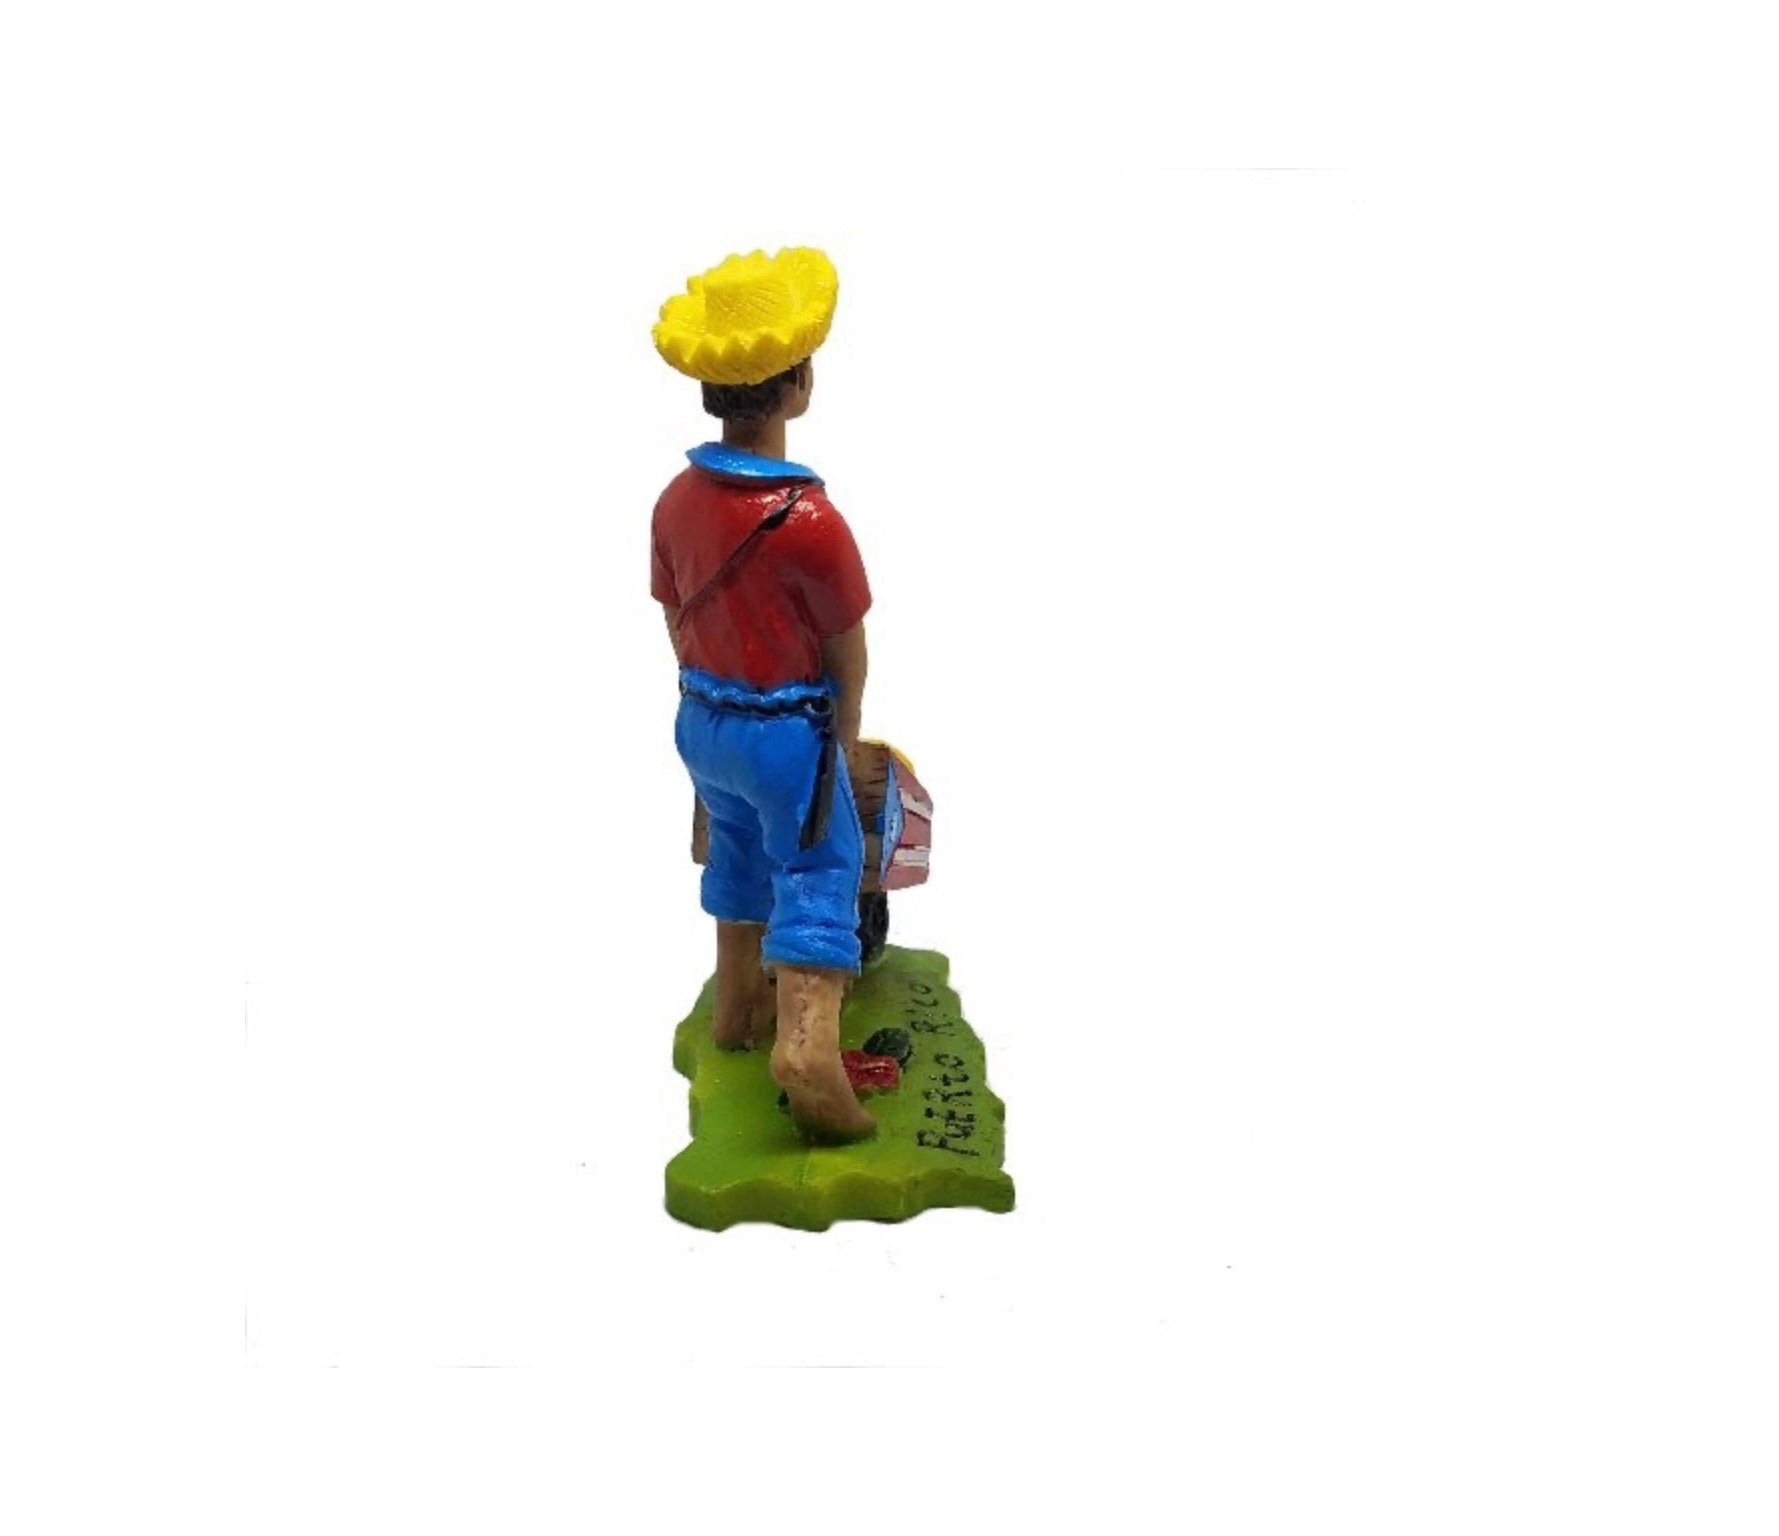 Puerto Rico Jibaro With Fruits Figures 4" Inches